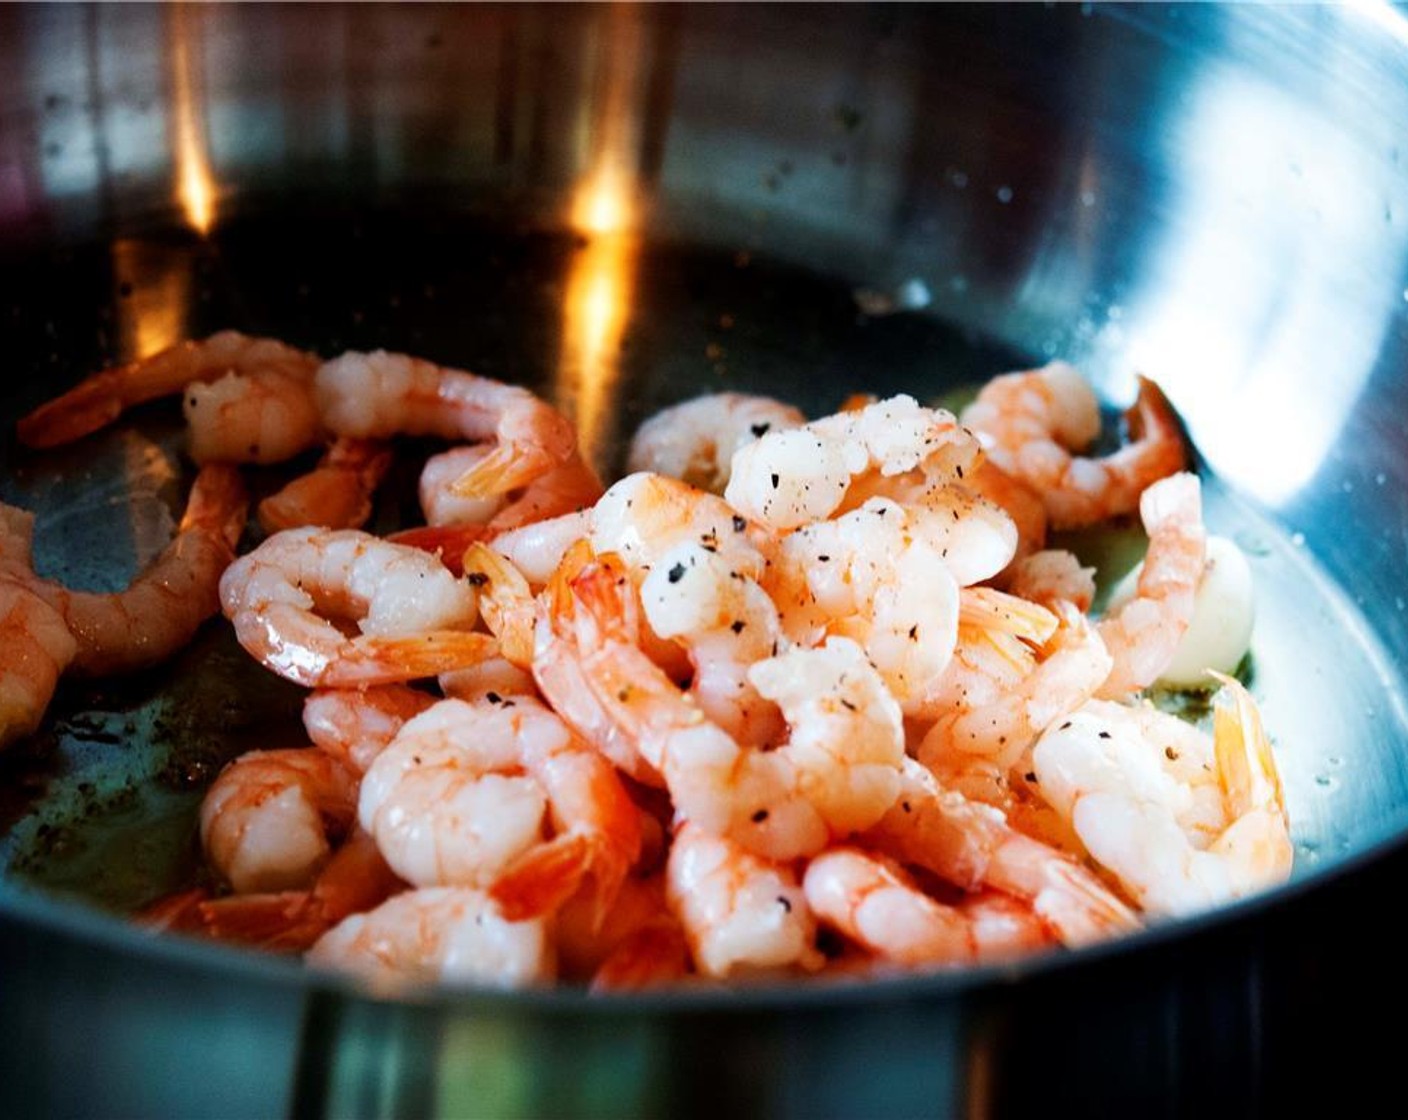 step 3 Add the shrimps, season with Salt (to taste) and Ground Black Pepper (to taste), and cook for about 10 minutes.